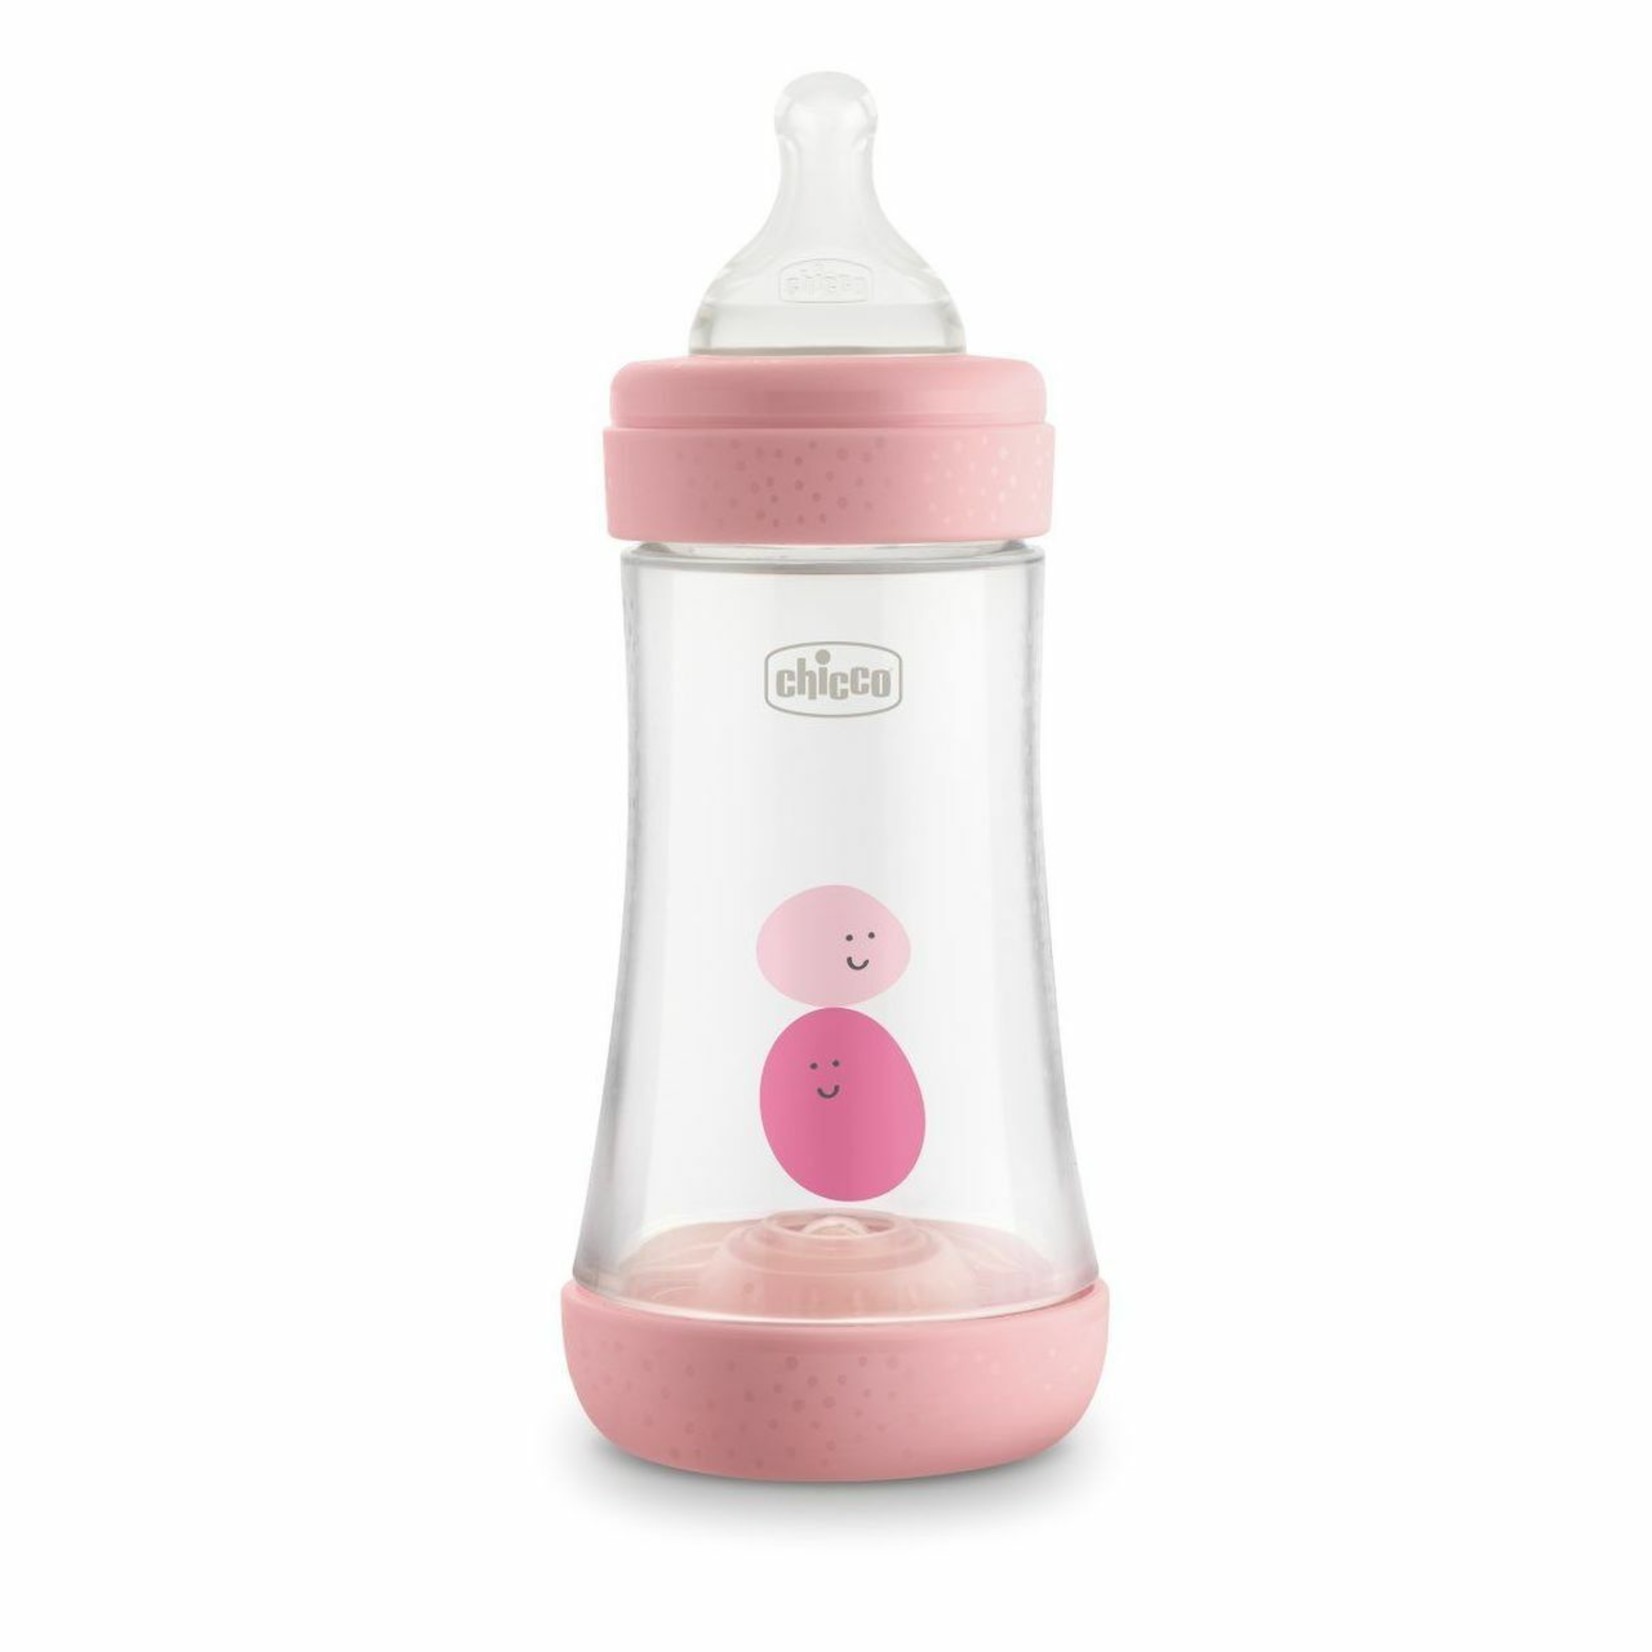 Chicco Perfect 5 Bottle